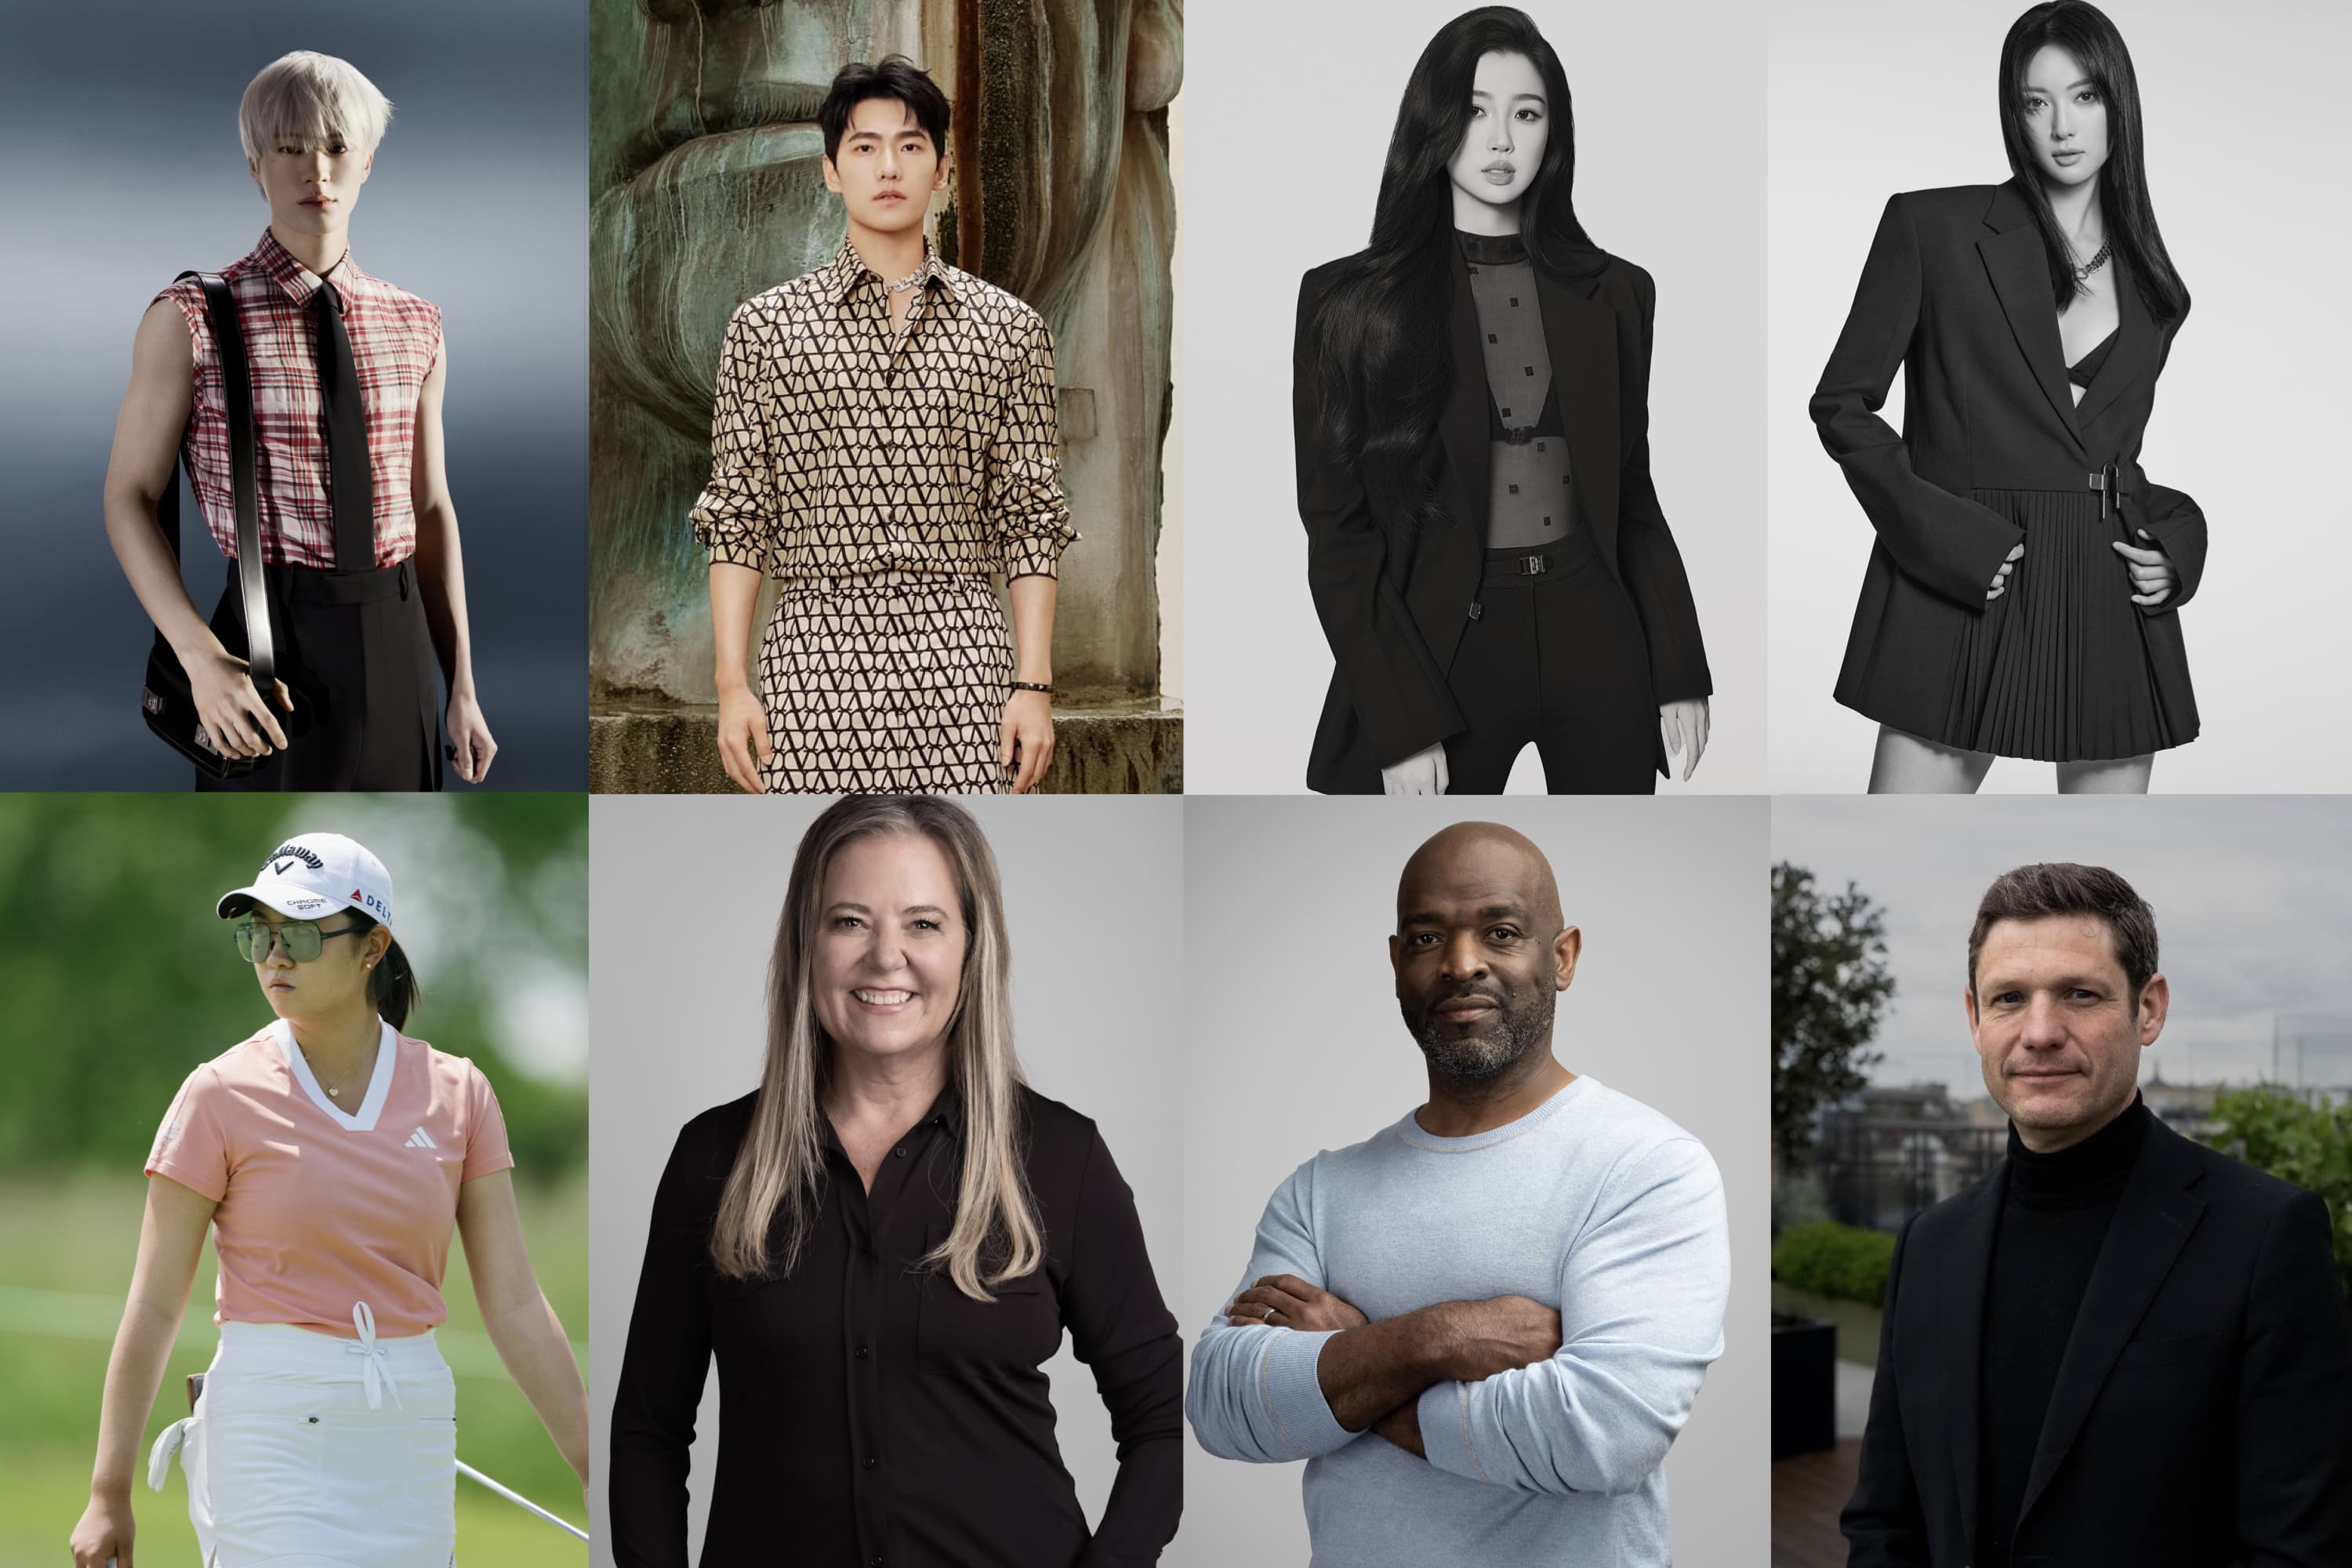 LVMH Group and Givenchy join the industry supporter line-up for